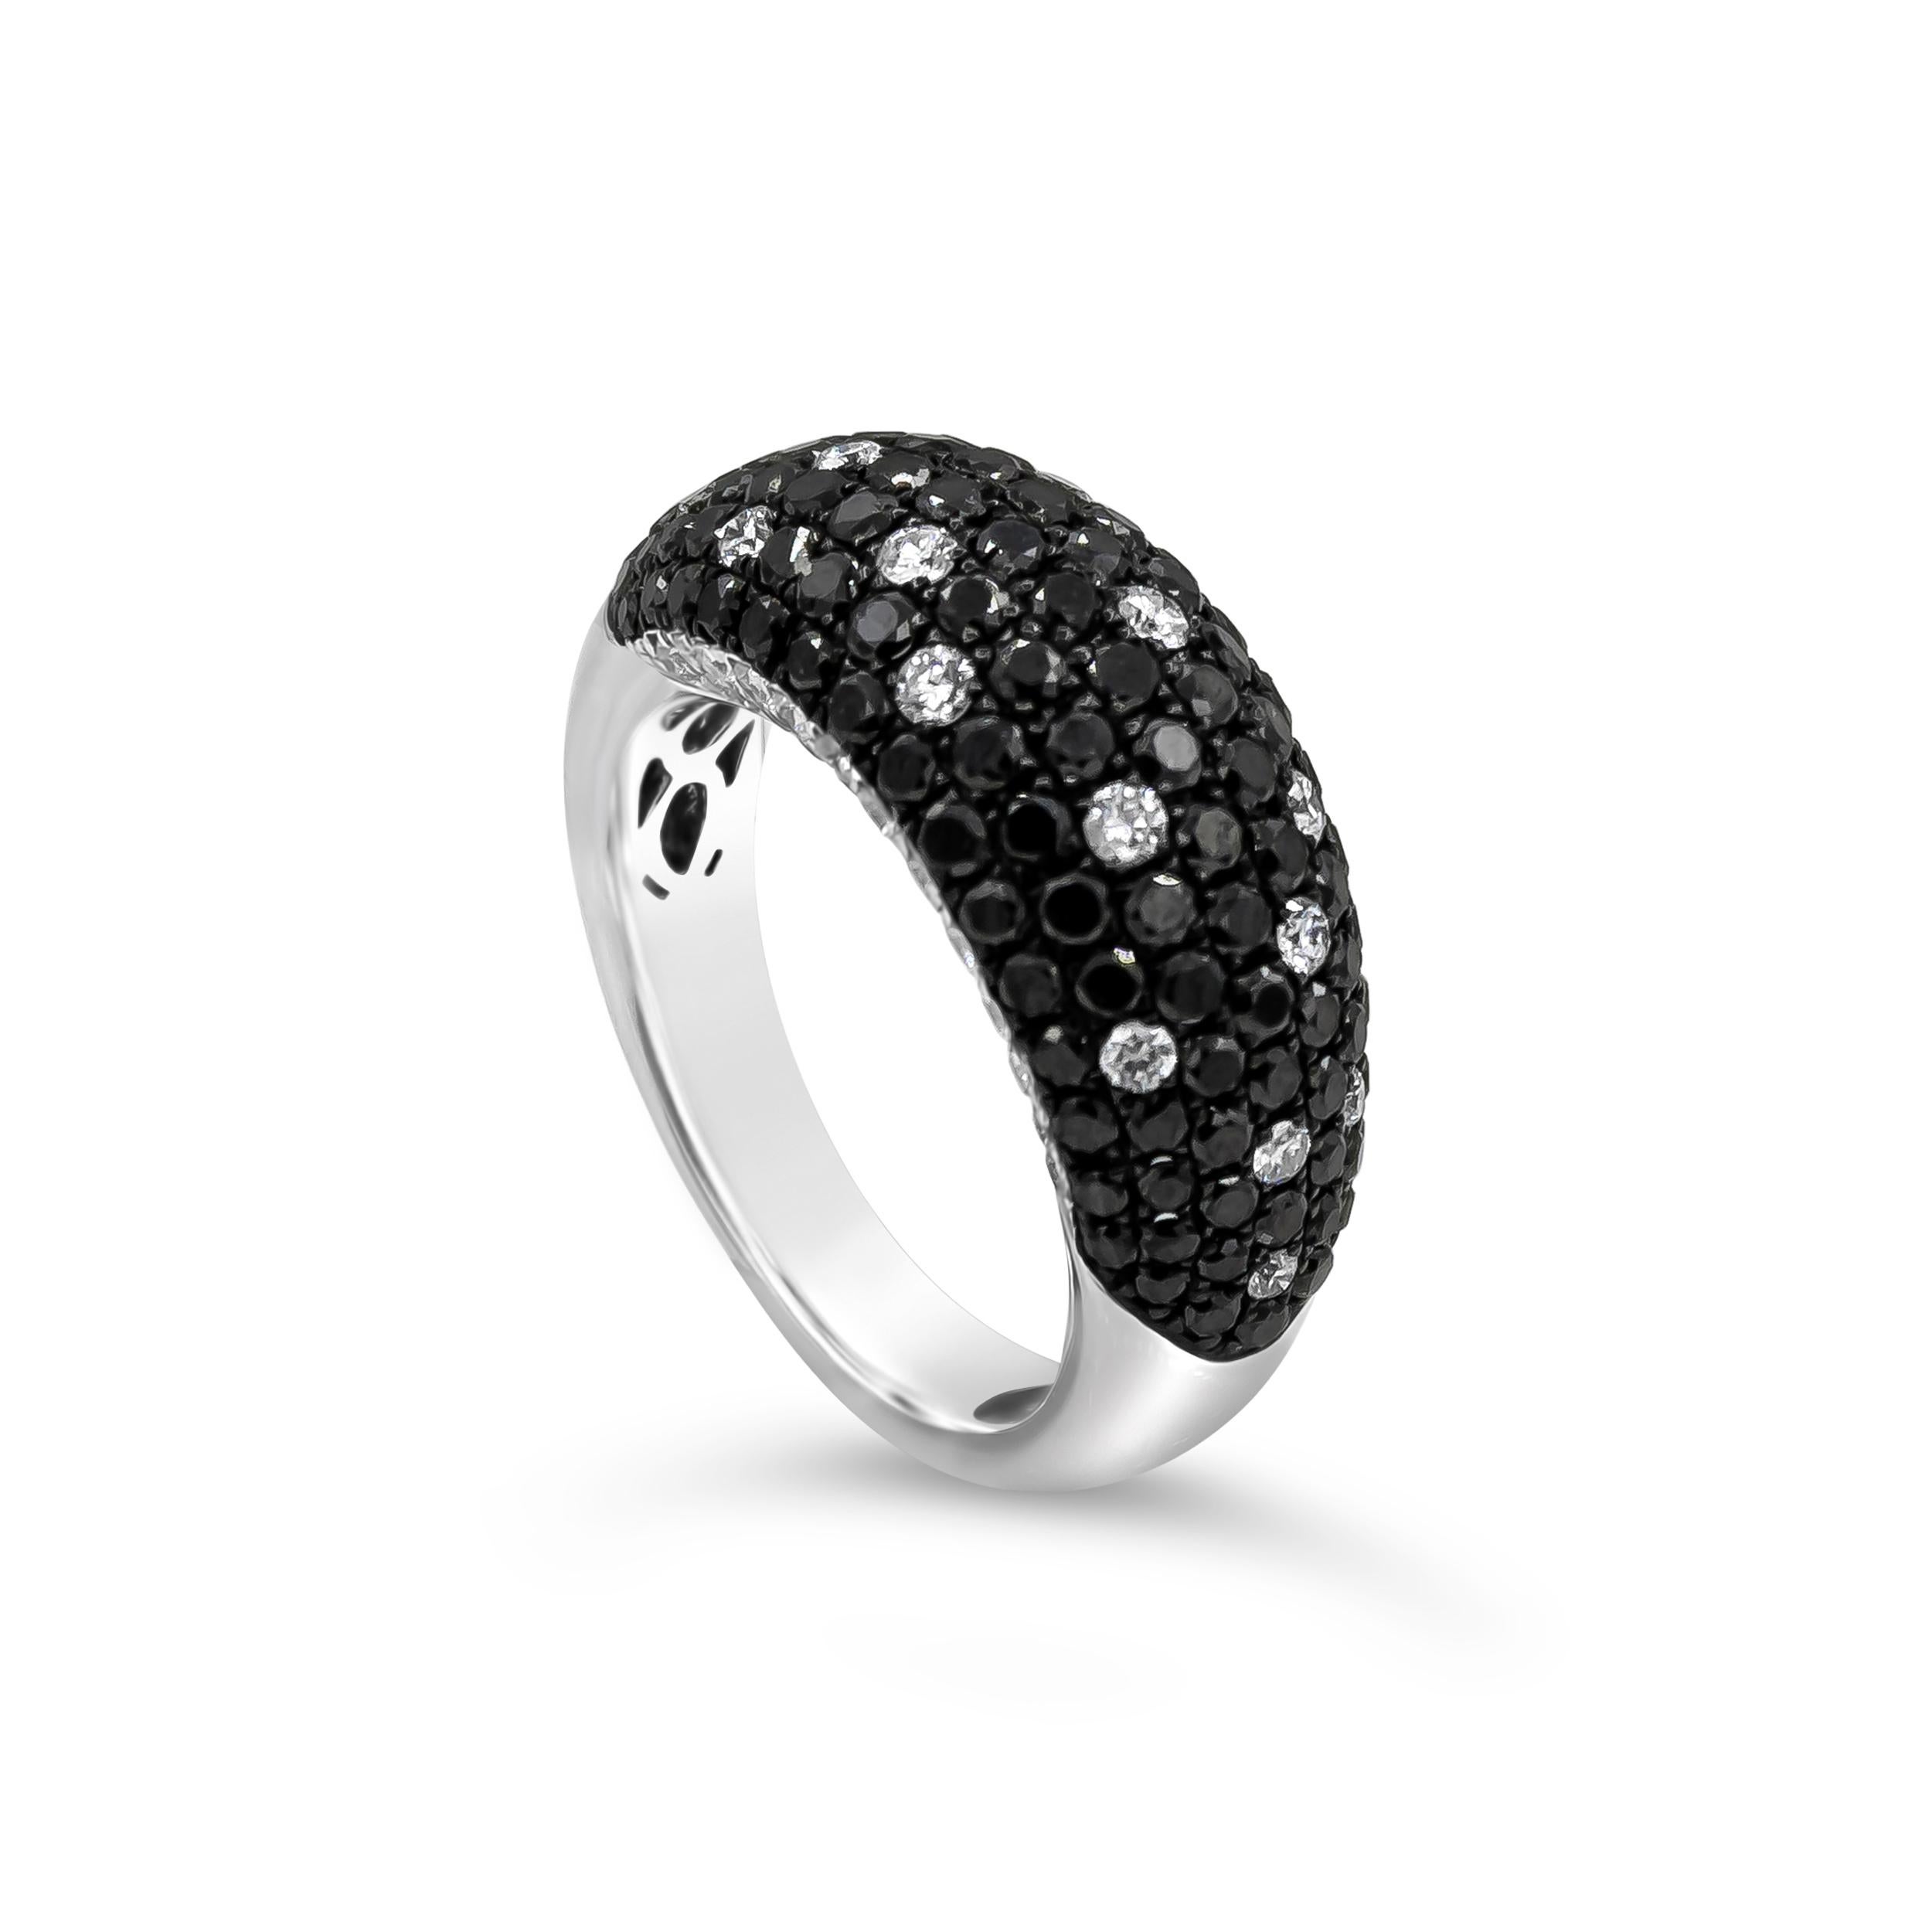 A exquisite and stylish ring showcasing black diamonds with white diamond accents, micro-pave set in a domed setting. Black diamonds weigh 1.68 carats total; white diamonds weigh 0.67 carats total. Finely made in 18K White Gold and Size 6.75 US